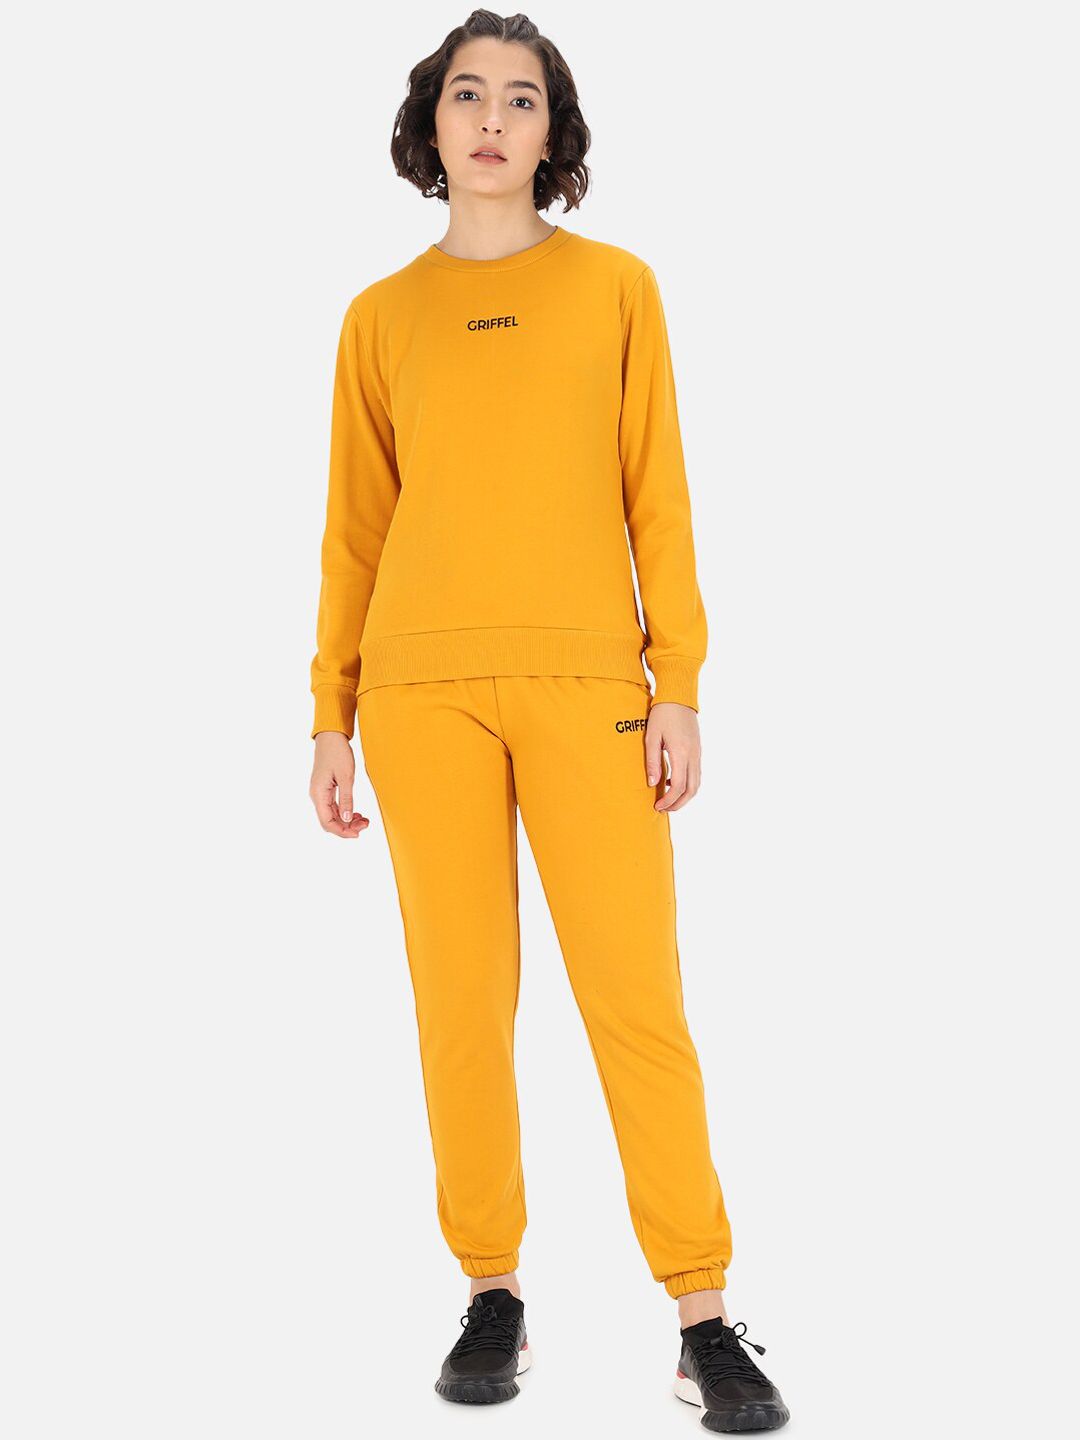 GRIFFEL Women Mustard Yellow Solid Cotton Tracksuits Price in India